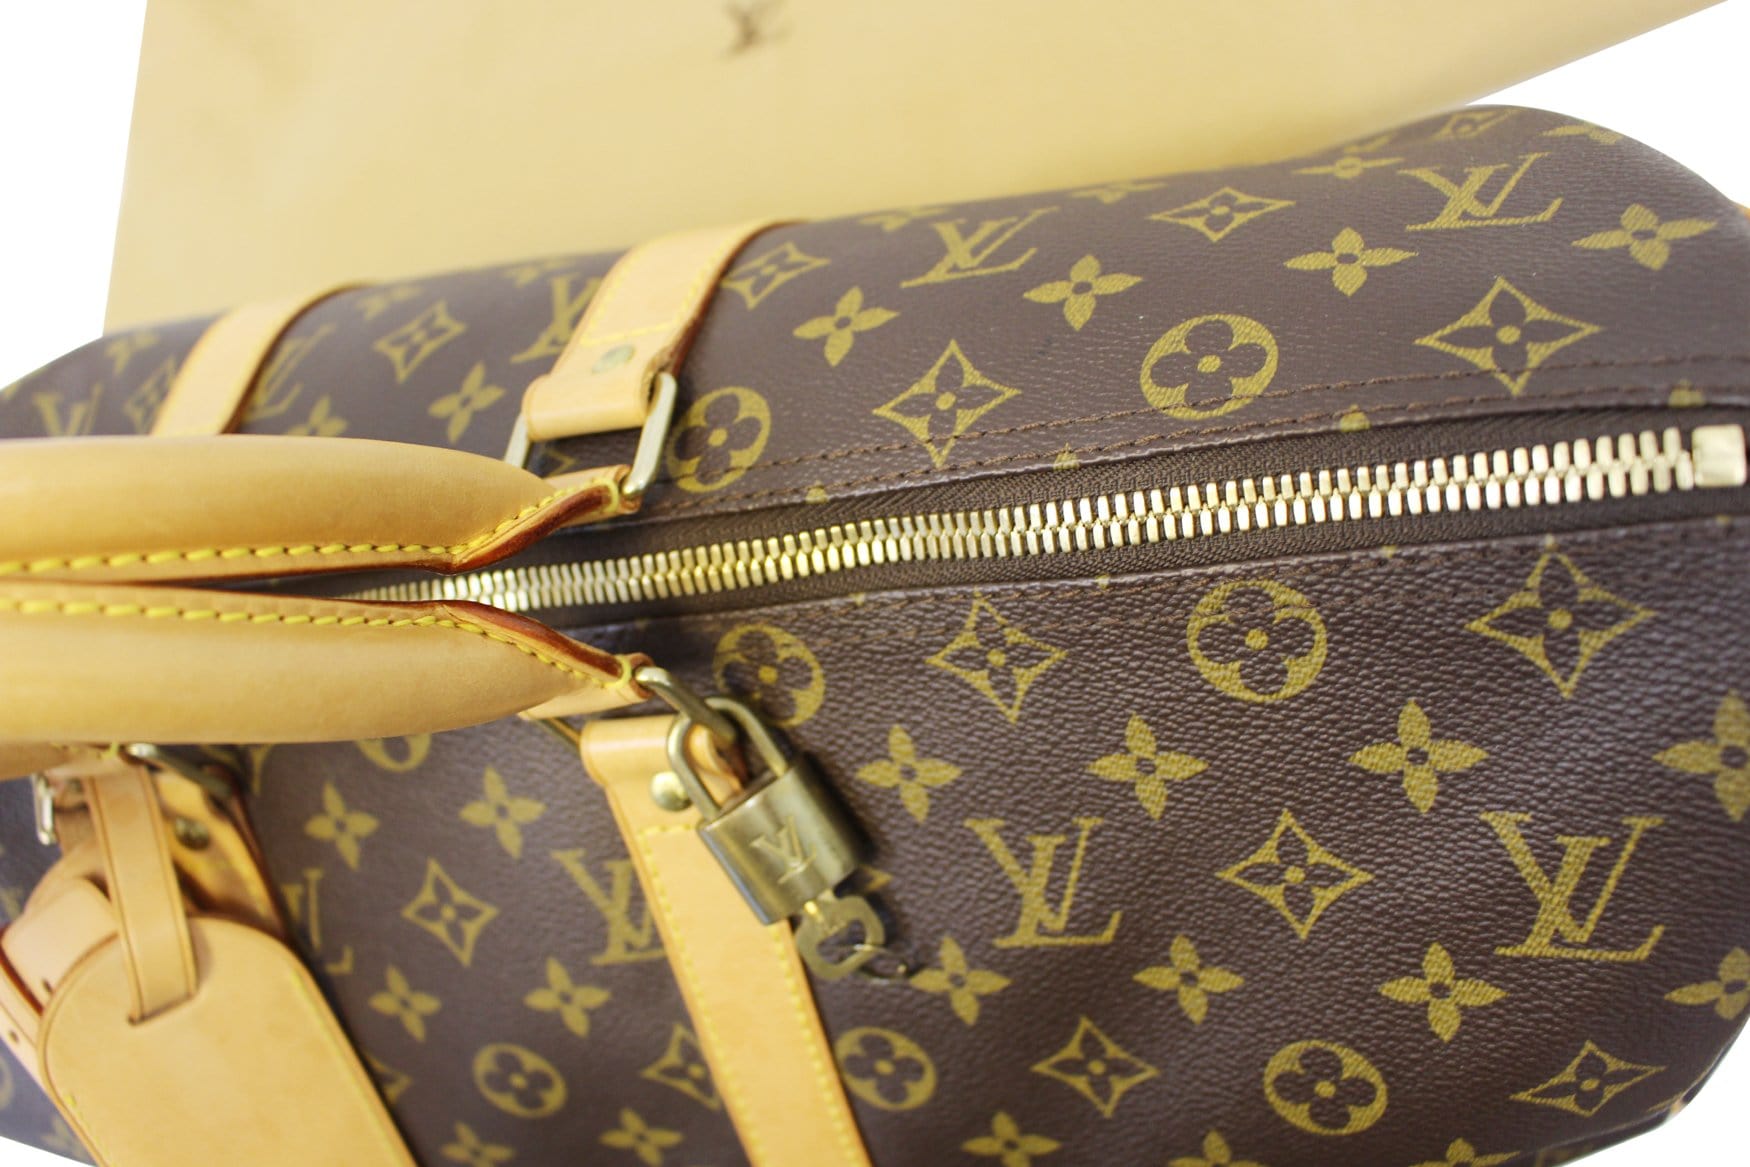 Louis Vuitton Monogram Keepall Bandouliere 45 Duffle Bag with Strap 862111